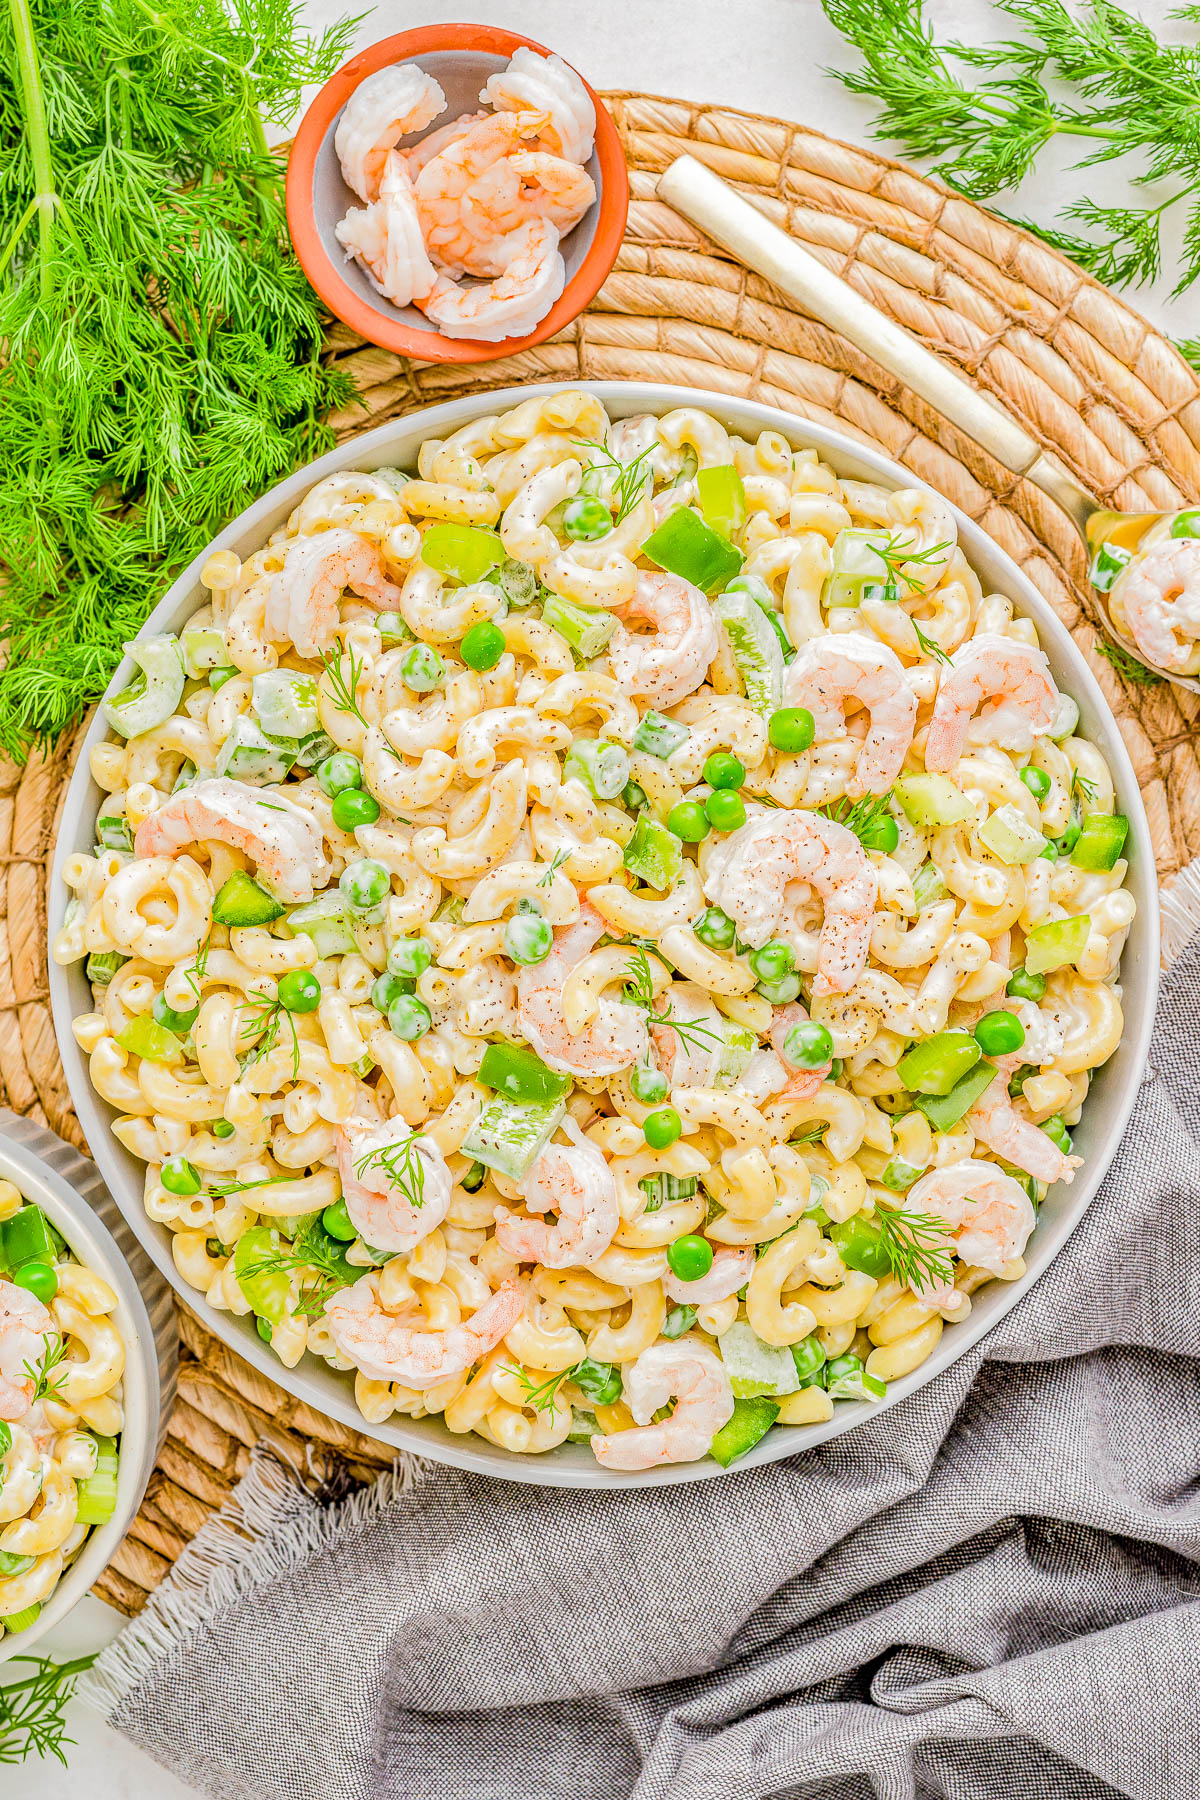 A vibrant shrimp pasta salad with green peas, dill, and cashews, served on a white platter over a rustic wicker mat and grey linen.